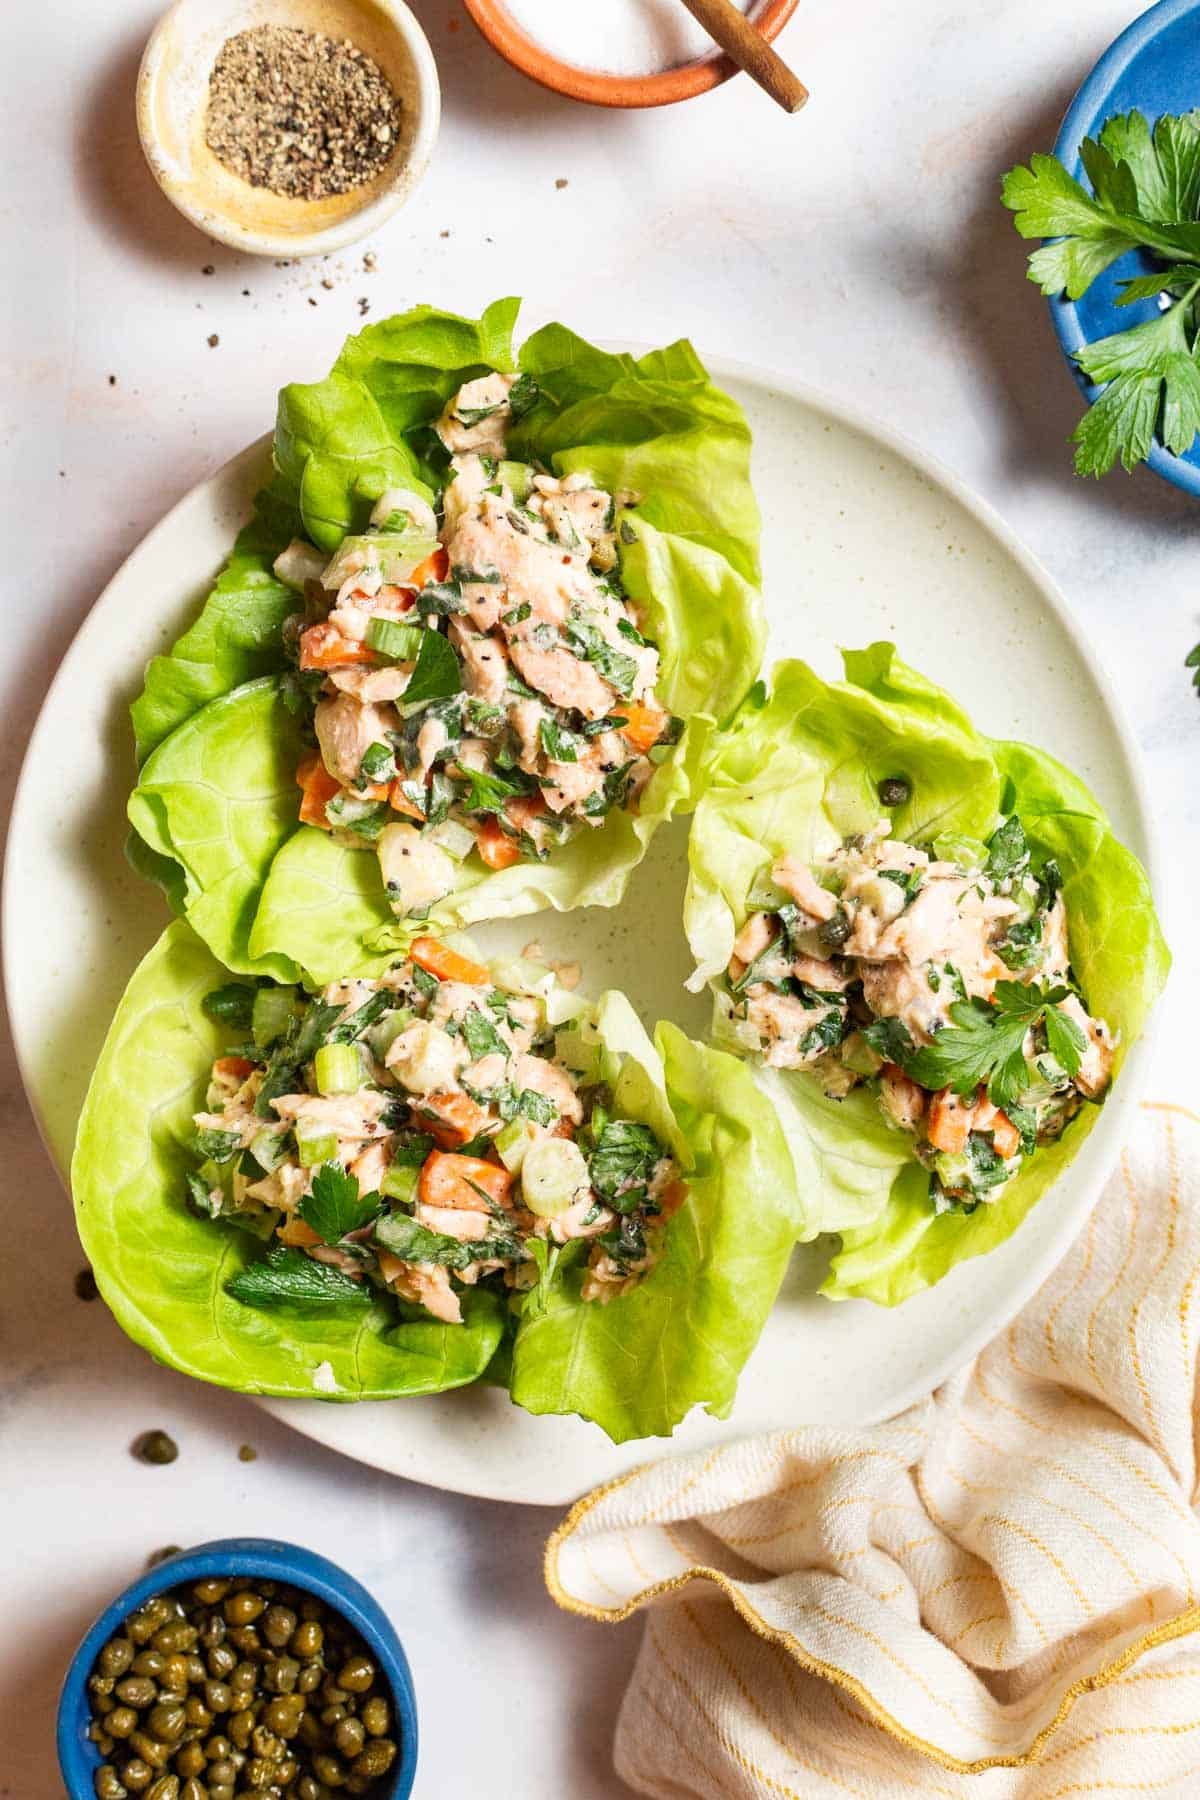 An overhead photo of 3 servings of the salmon salad in lettuce wraps on a plate surrounded by bowls of salt, pepper, capers and parsley and a kitchen towel.